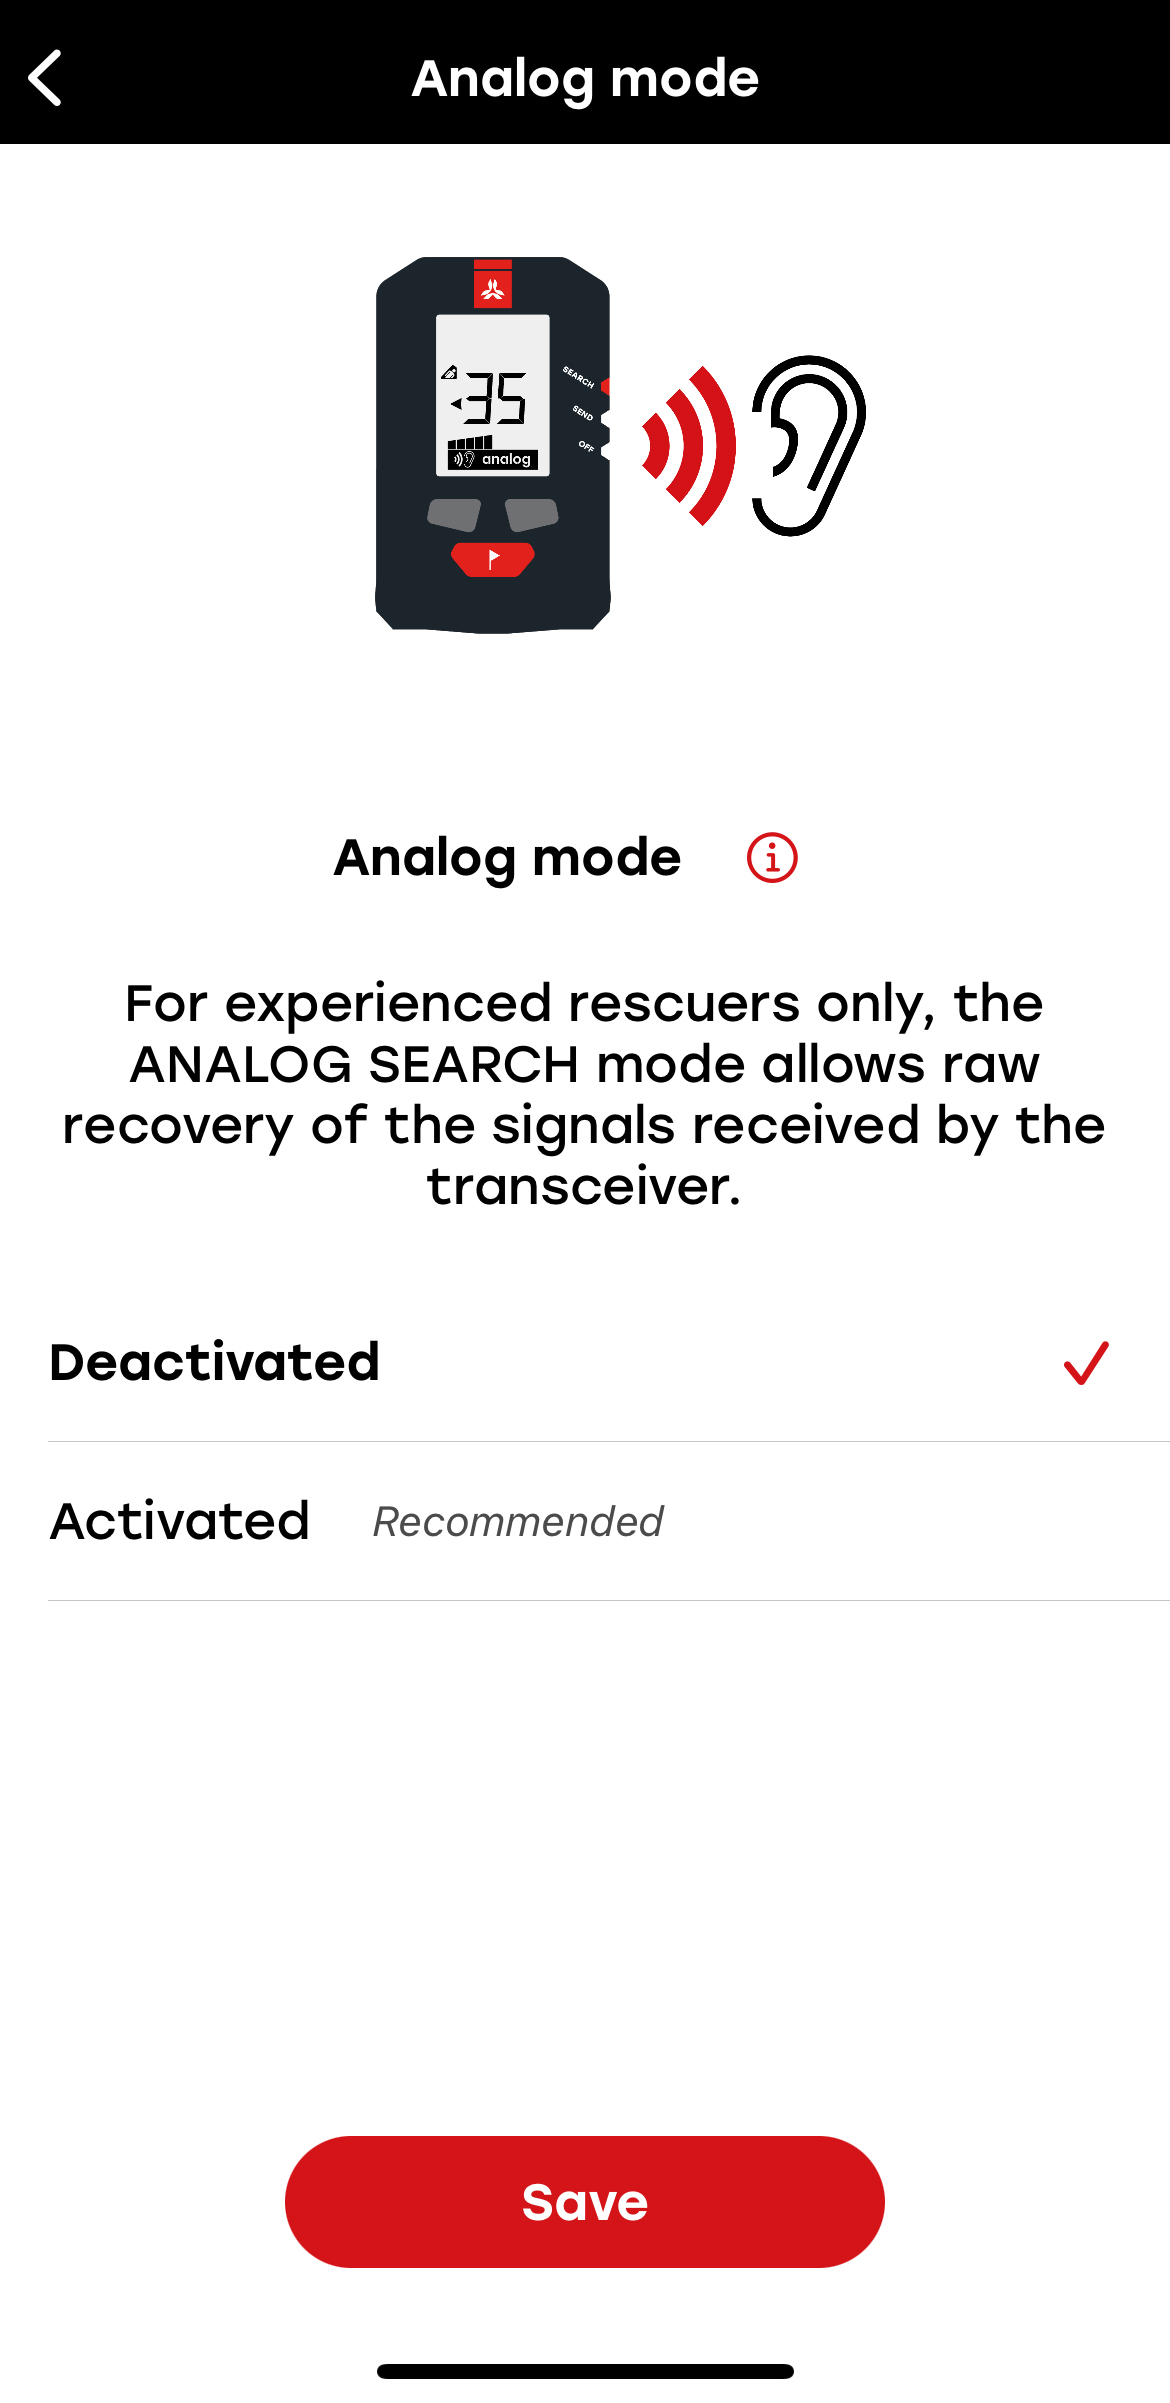 You can select analog mode in Arva's app.